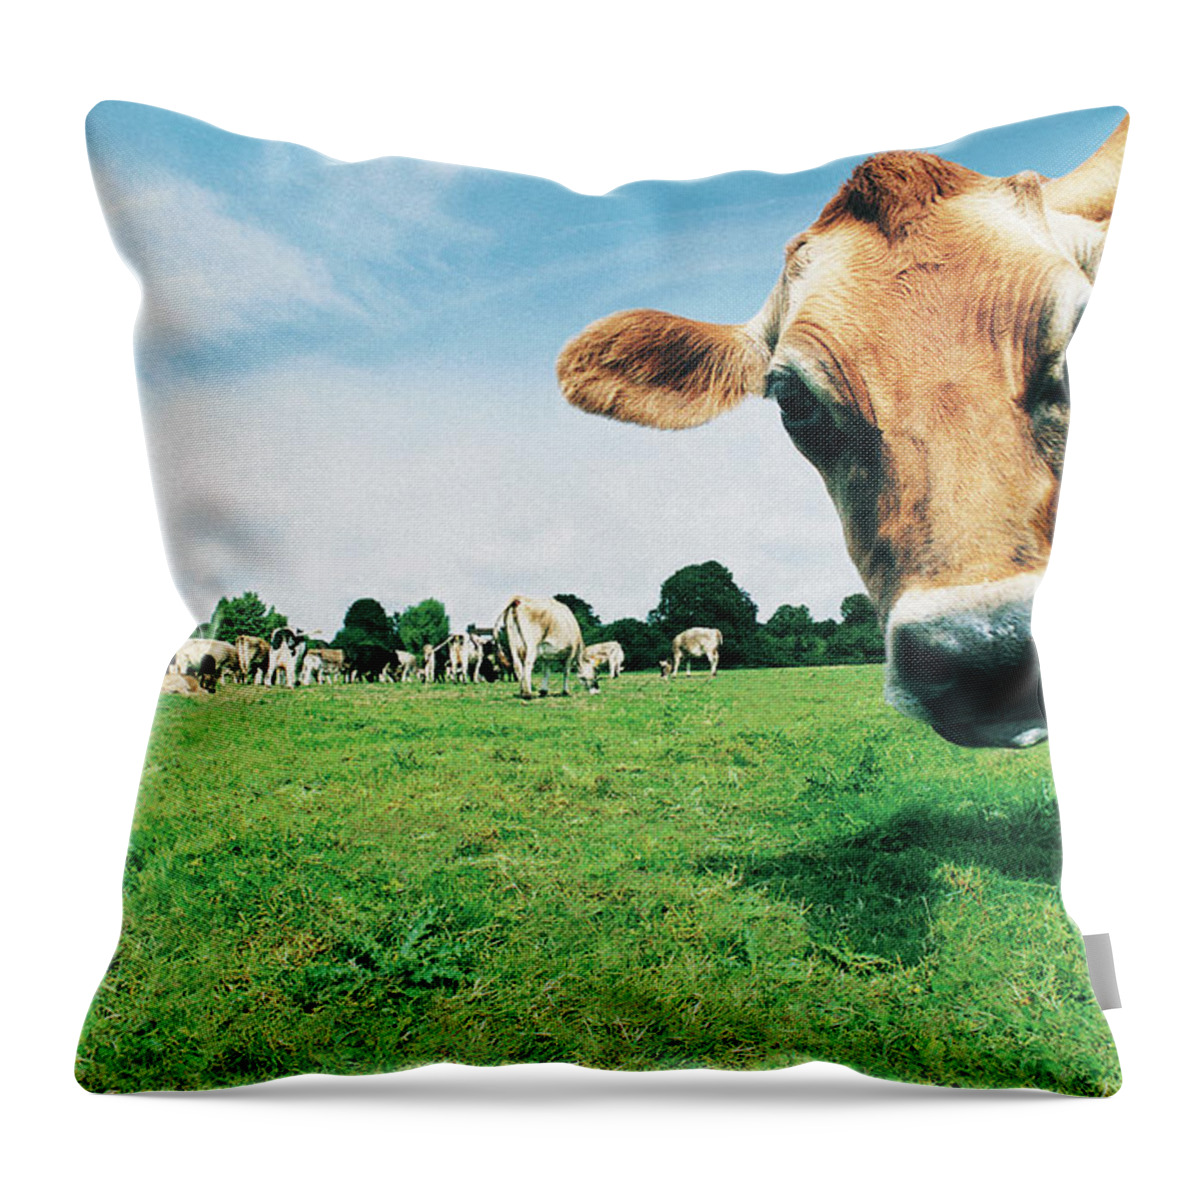 Grass Throw Pillow featuring the photograph Head Of Jersey Cow by Digital Vision.